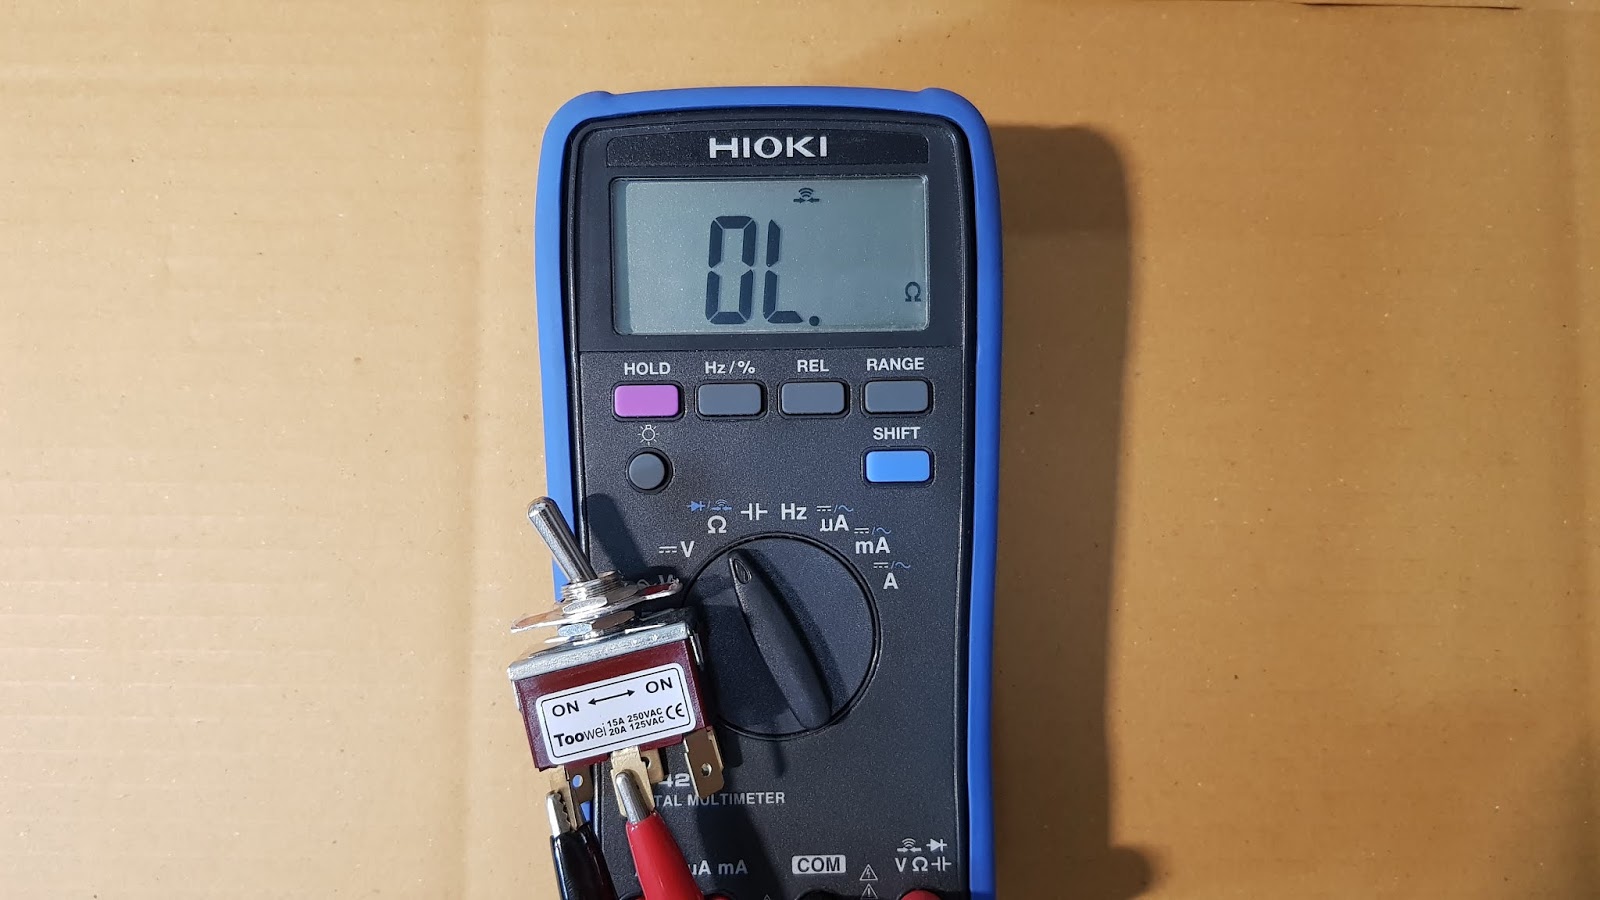 Multimeter how to test device with a multimeter ... list , Next page below: HOW TO TEST SWITCH Toggle switch Rocker switch Limit Switch